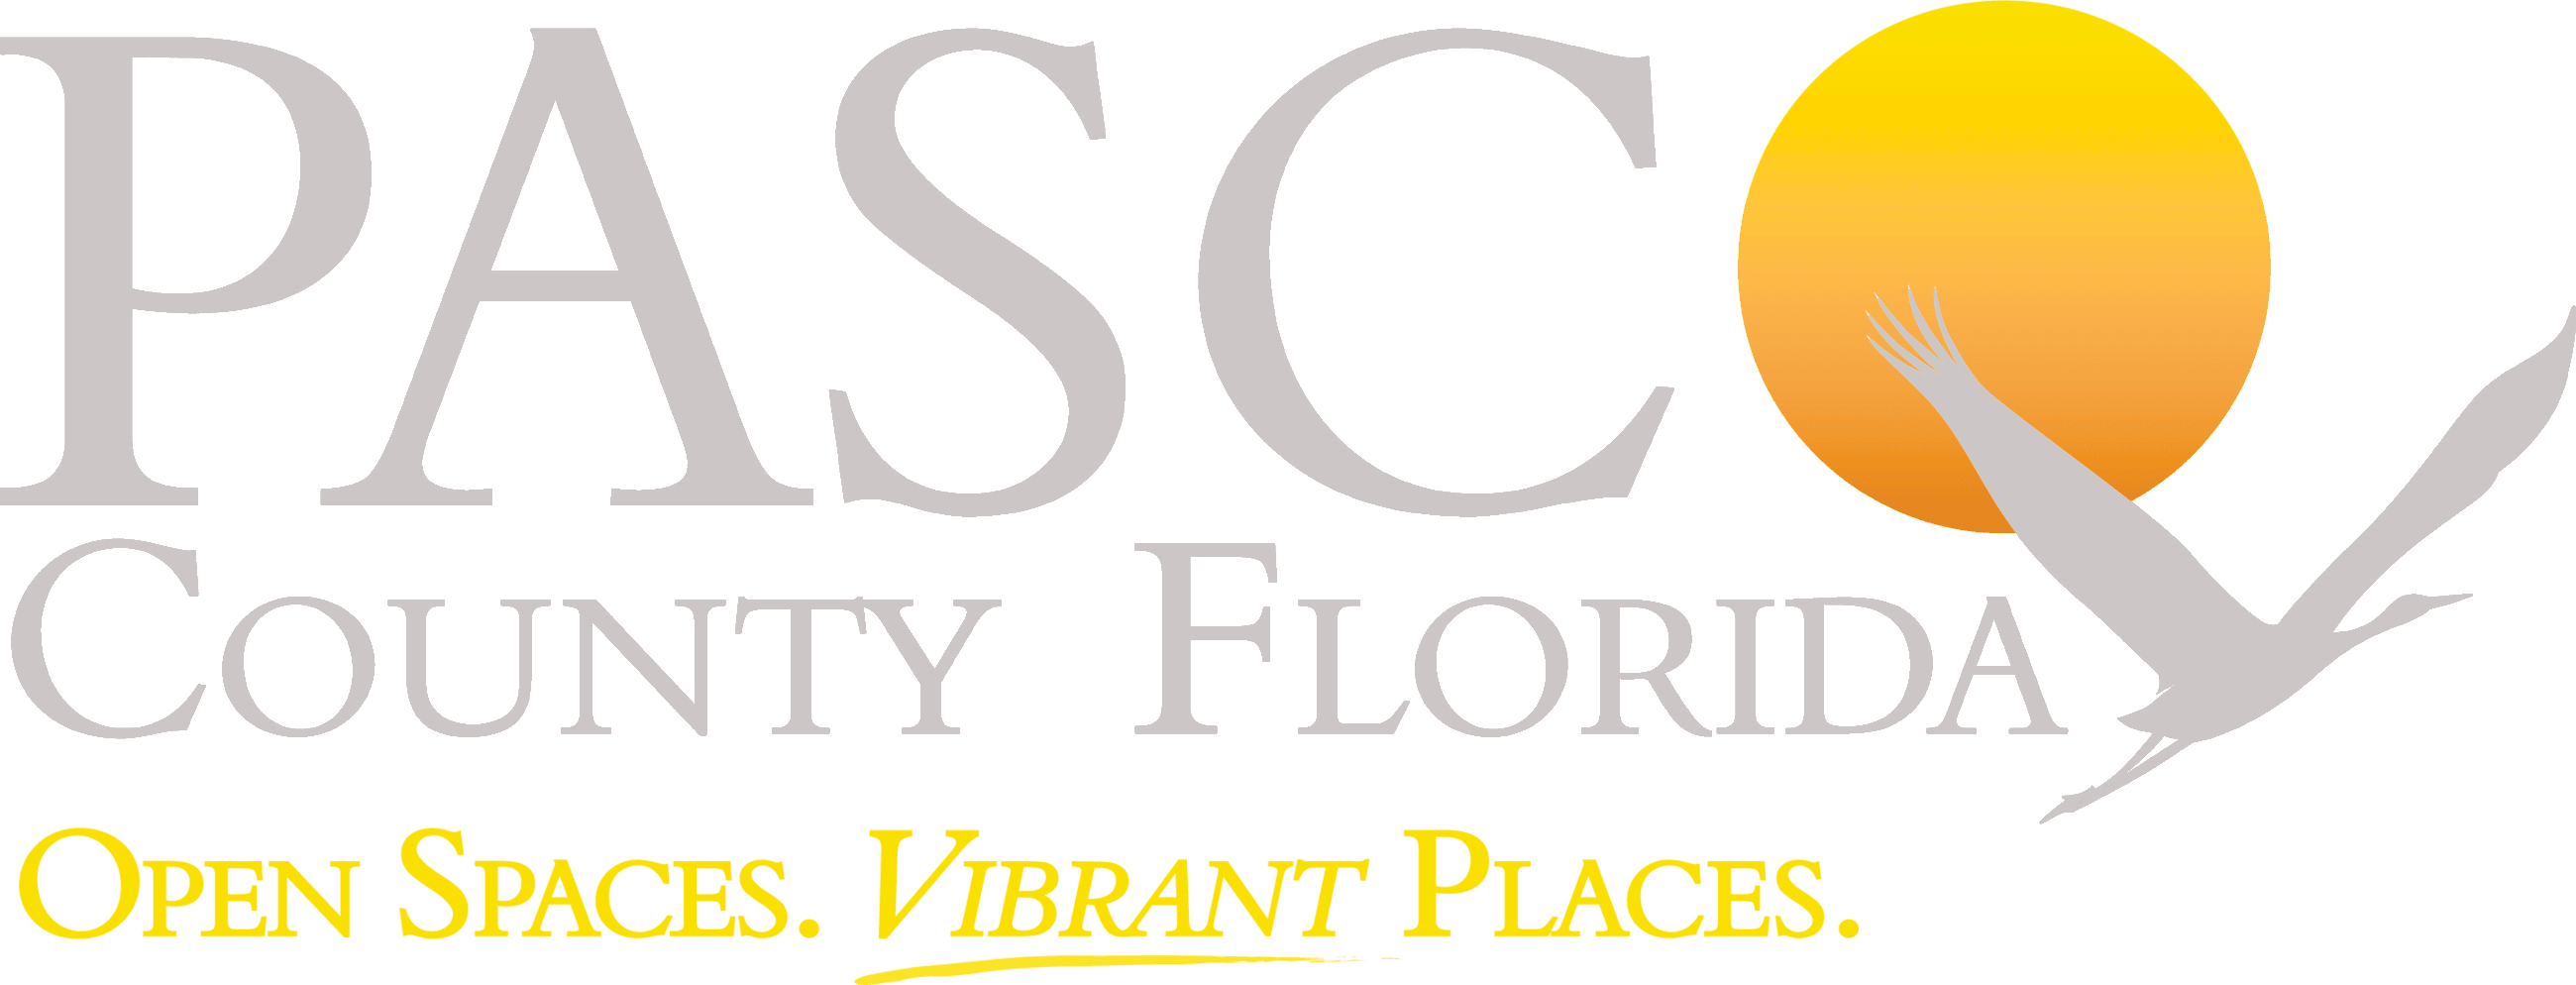 Pasco County Board of County Commissioners, a dedicated county board with services for Pasco County residents